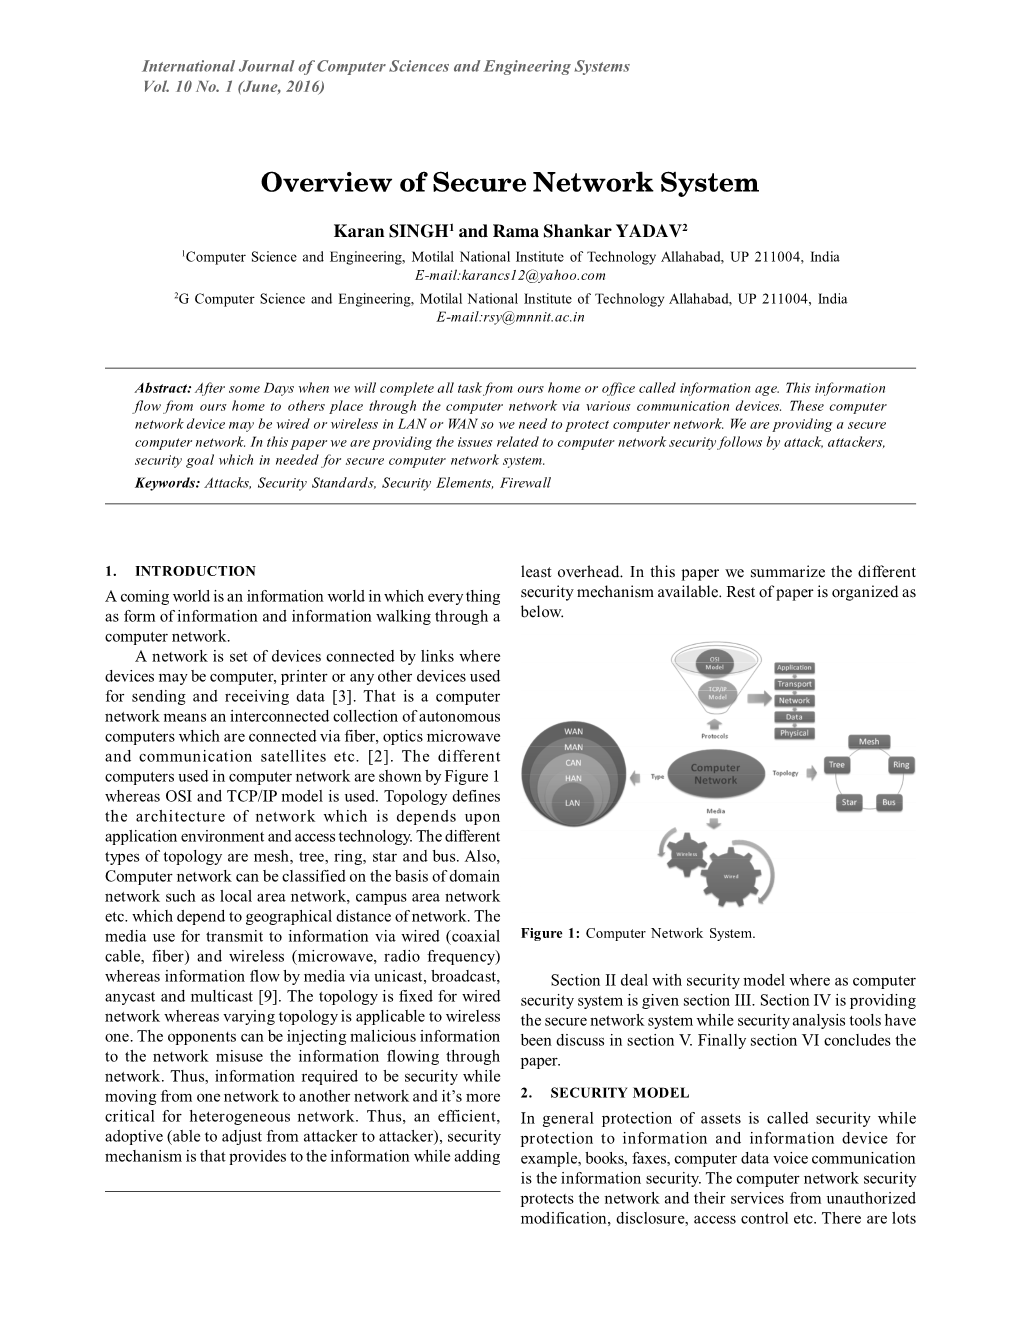 Overview of Secure Network System